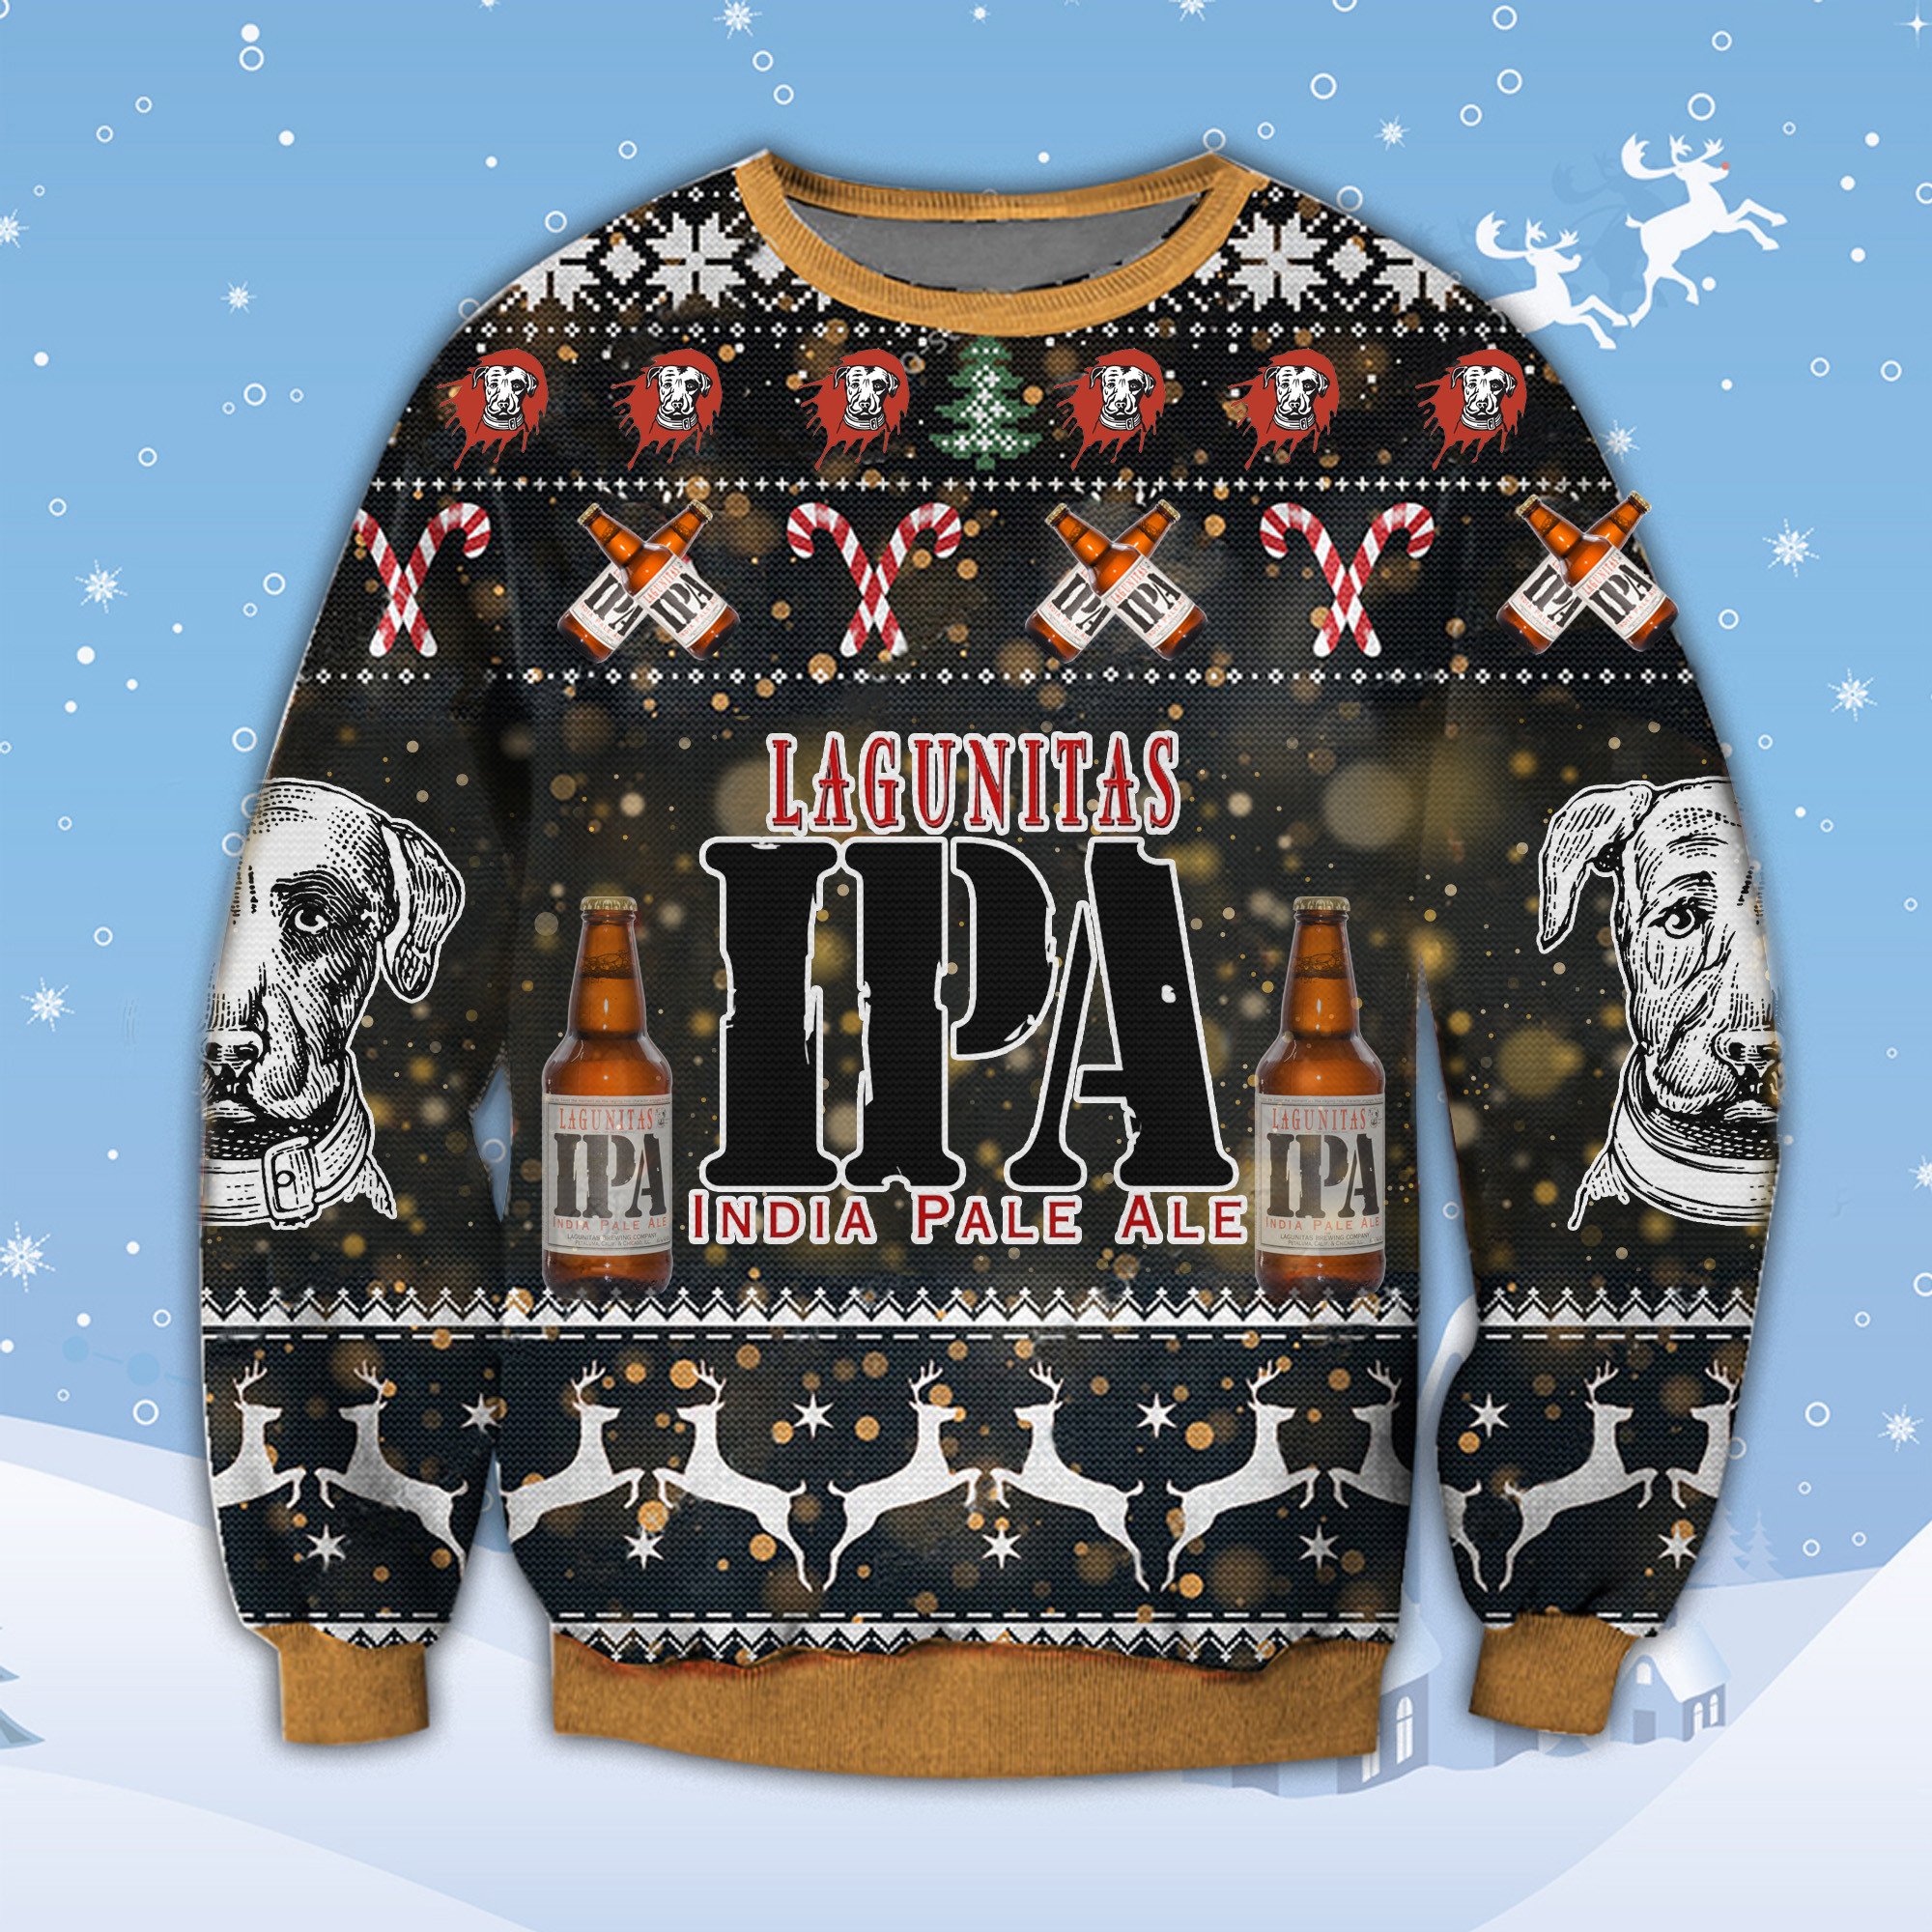 NEW Lagunitas India Pale Ale ugly Christmas sweater 1